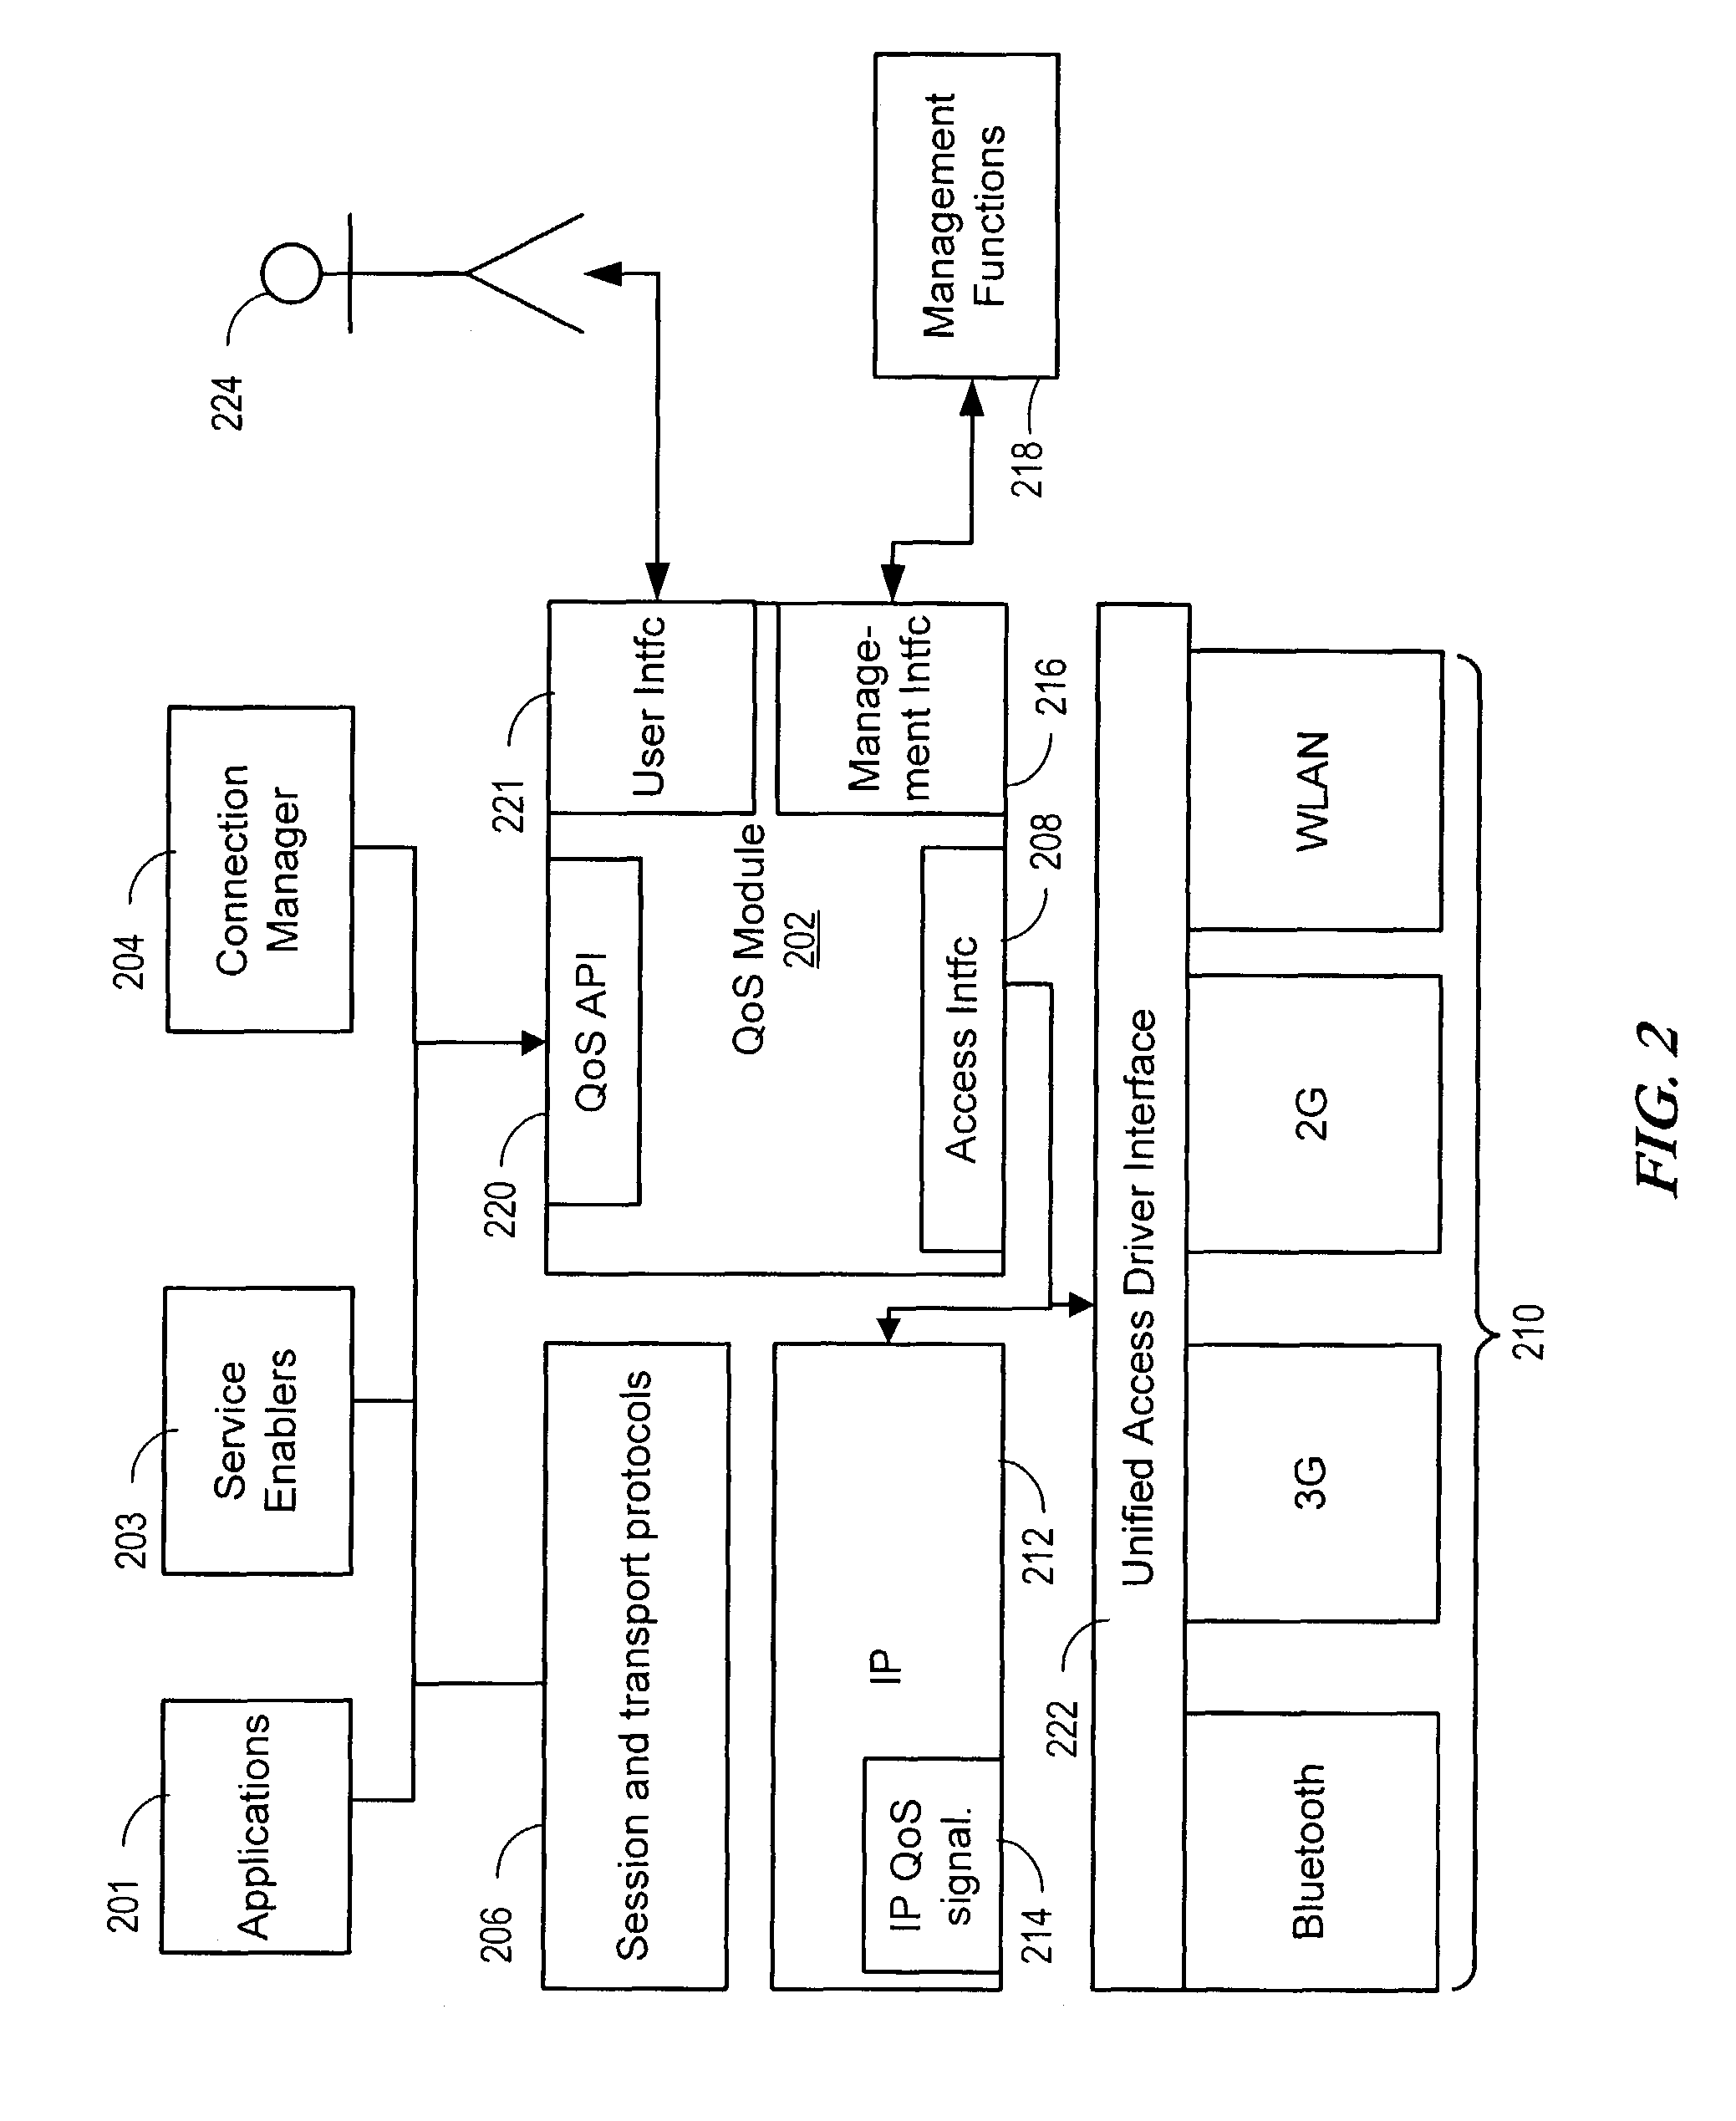 Apparatus and method for providing quality of service for a network data connection